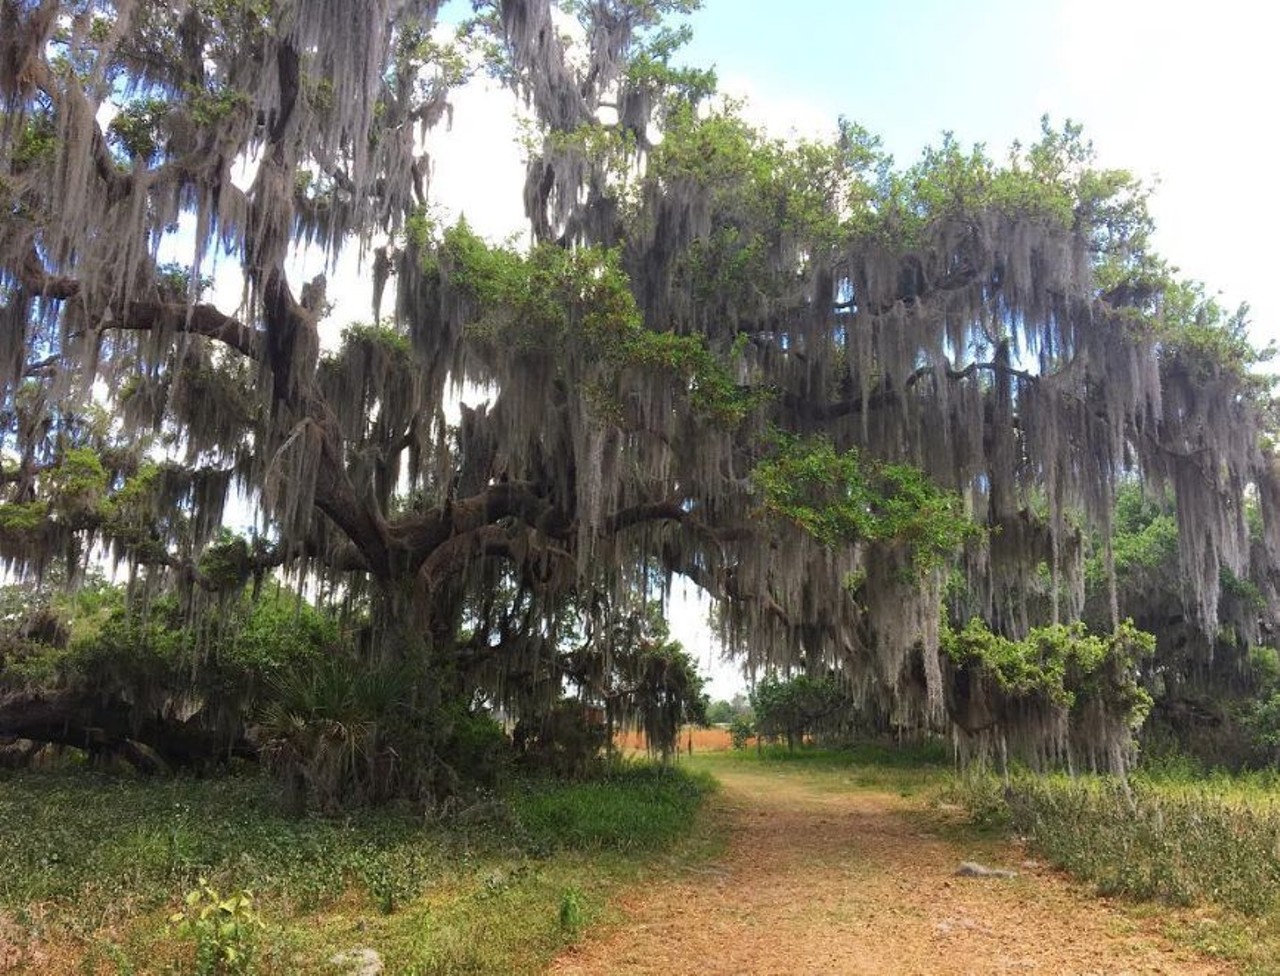 Twin Oaks Conservation Area
2001 Macy Island Road, Kissimmee 
Now serving as a 370-acre conservation area in Osceola County, this area consists of trails that are open for both hikers and equestrians. The 1.9-mile area also features a canoe launch, fishing pier and overnight campsite.
Photo via yoimhales/Instagram